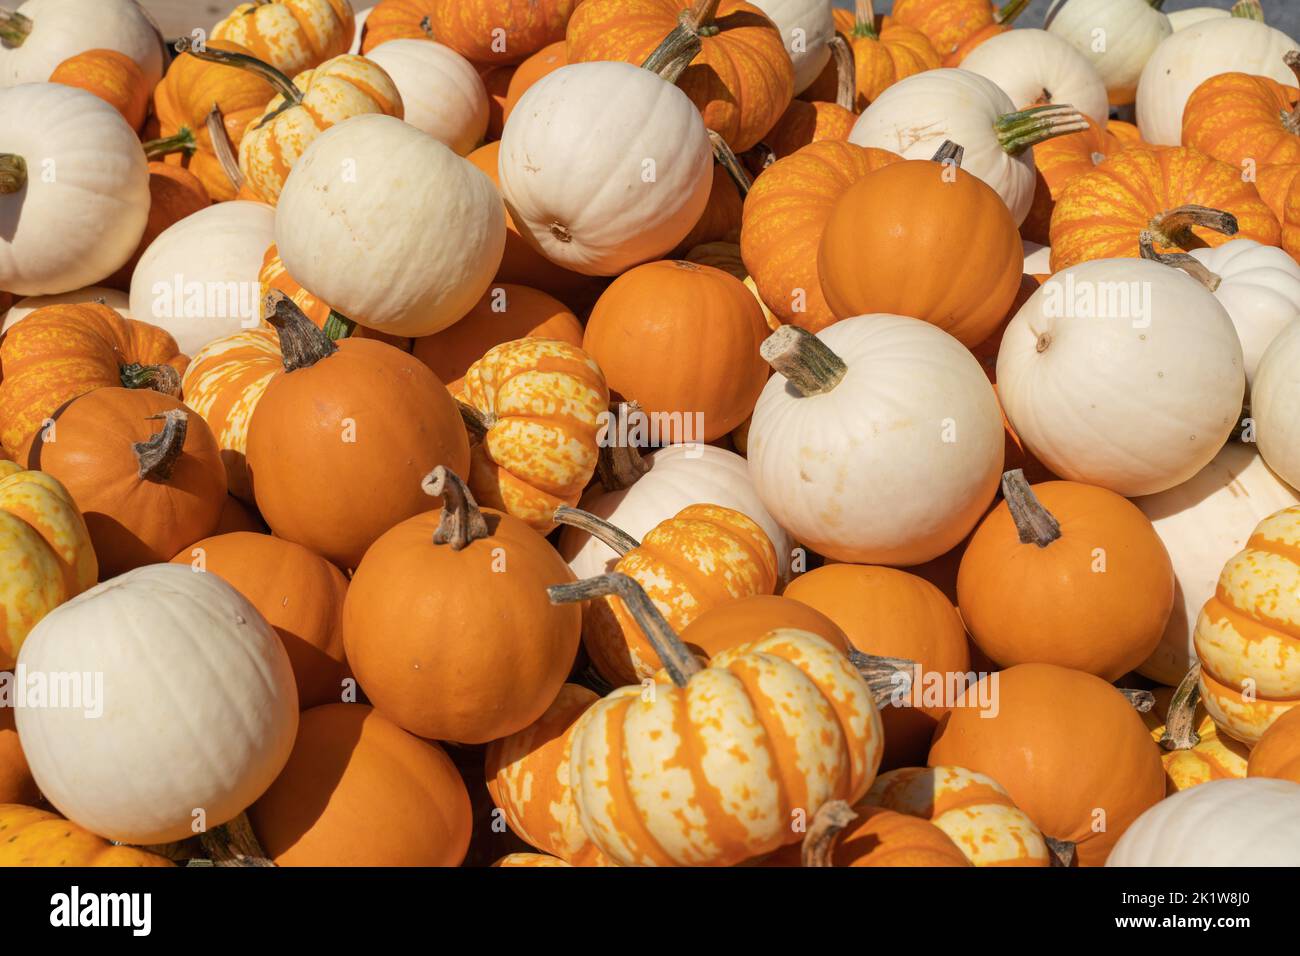 Jack-be-Little pumpkins fresh from the pumpkin patch and ready for Halloween and Thanksgiving holiday decorations. Stock Photo